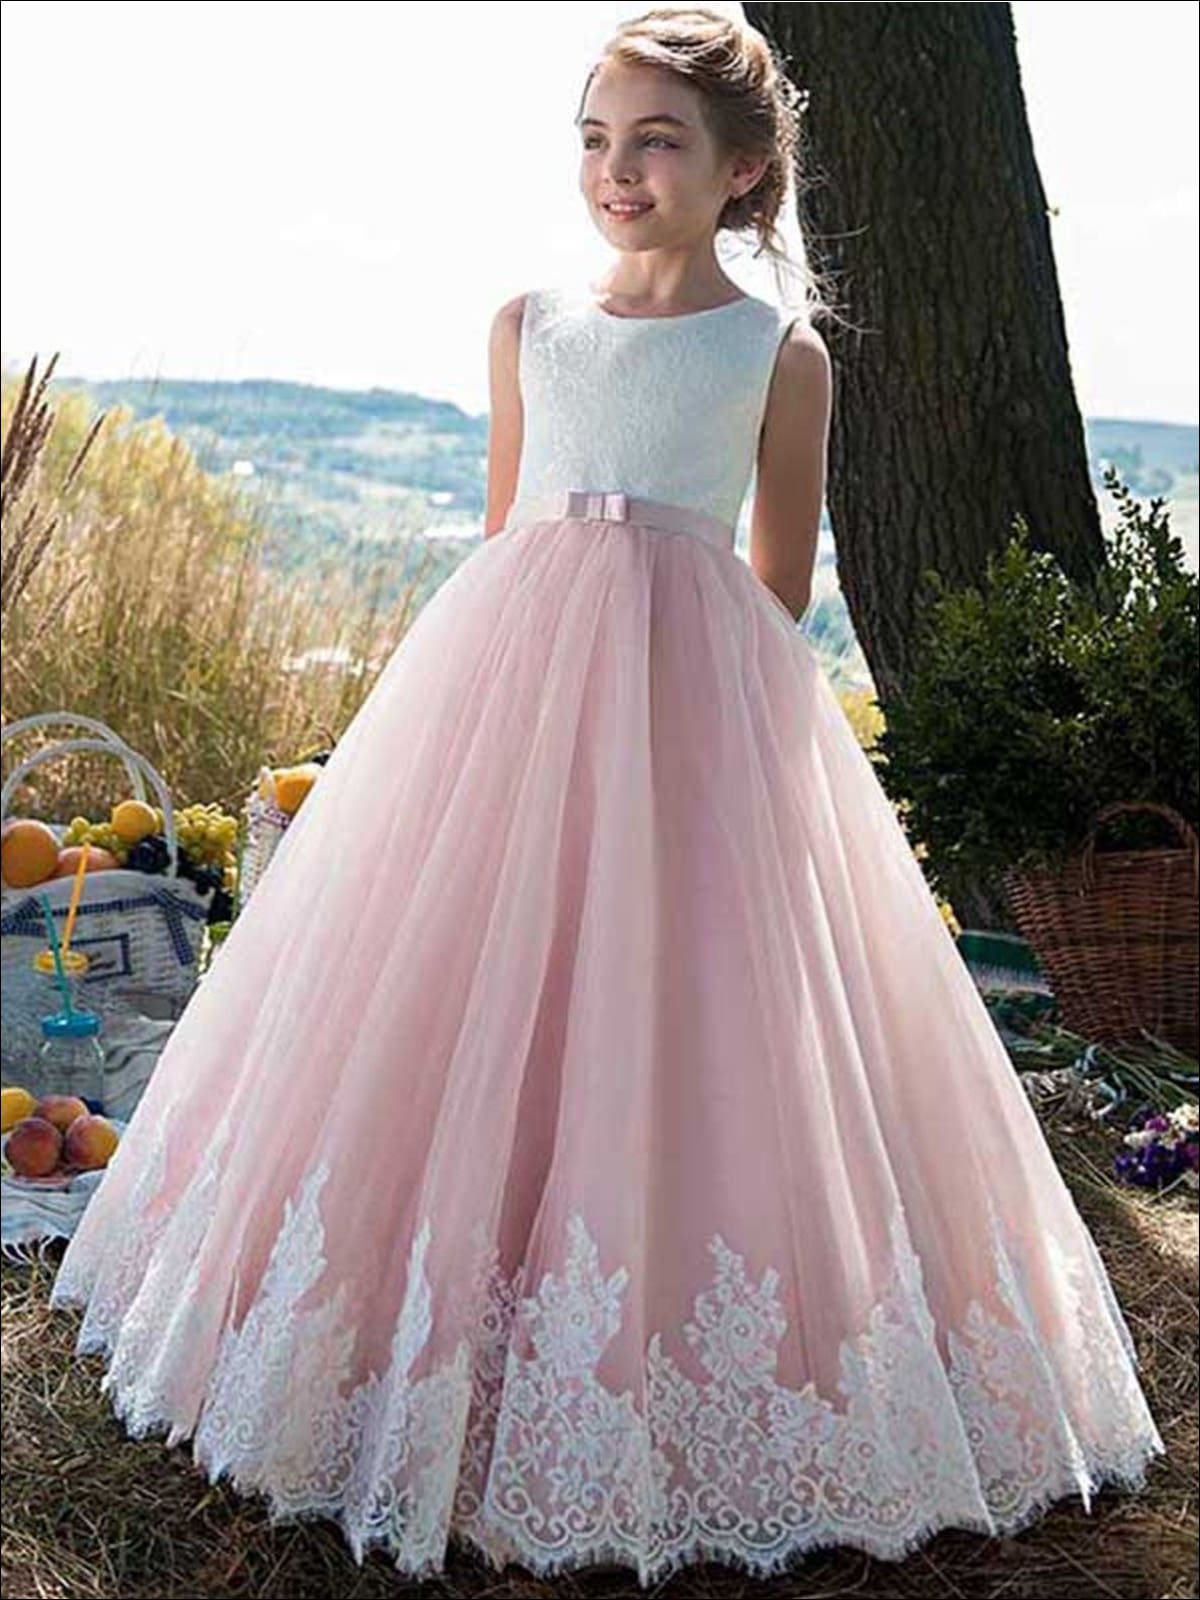 Girls Special Occasion Dress | Lace Sleeve Embroidered Communion Gown